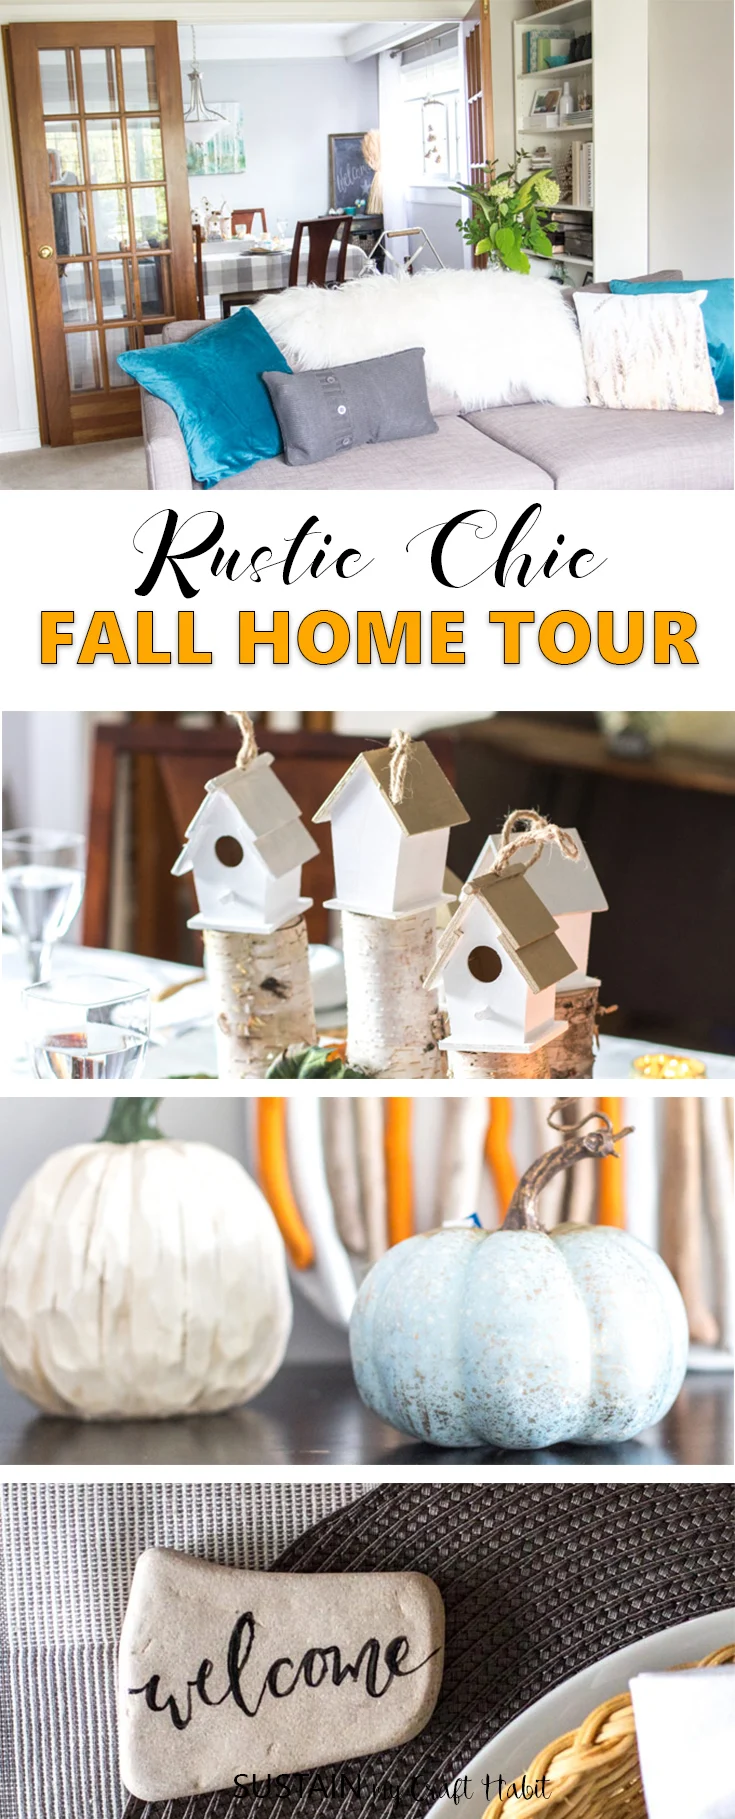 Gorgeous rustic chic fall home tour \ Fall decorating ideas with natural materials \ Teal and neutral fall decor \ Canadian bloggers fall home tour \ DIY autumn decorating ideas